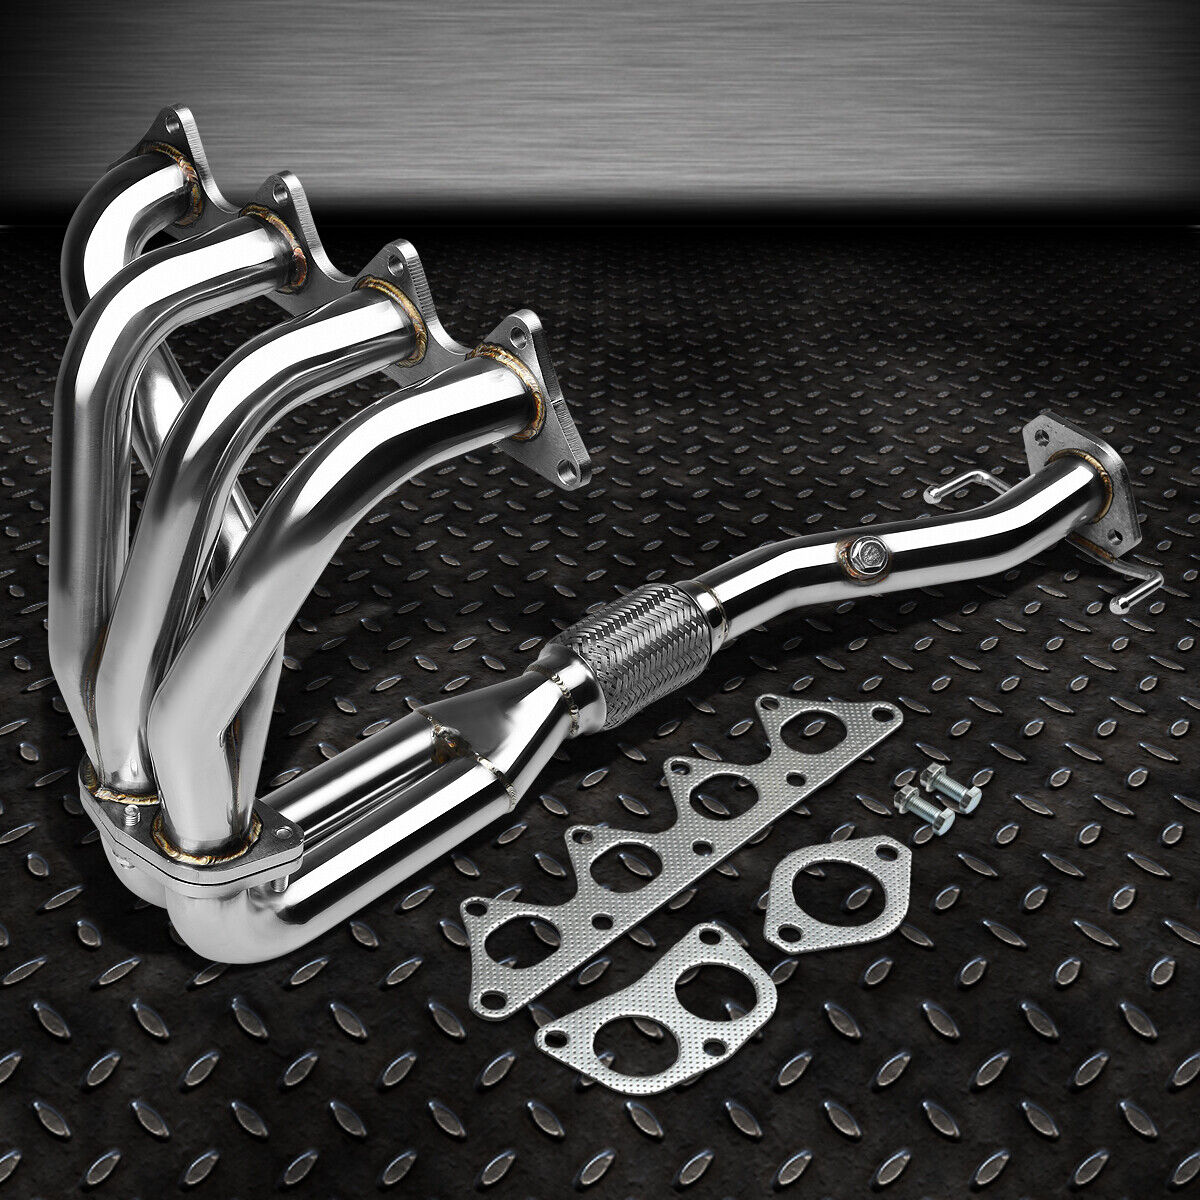 STAINLESS JDM RACING HEADER EXHAUST MANIFOLD 97-02 MIT MIRAGE 1.8 4CYL SOHC 4G93